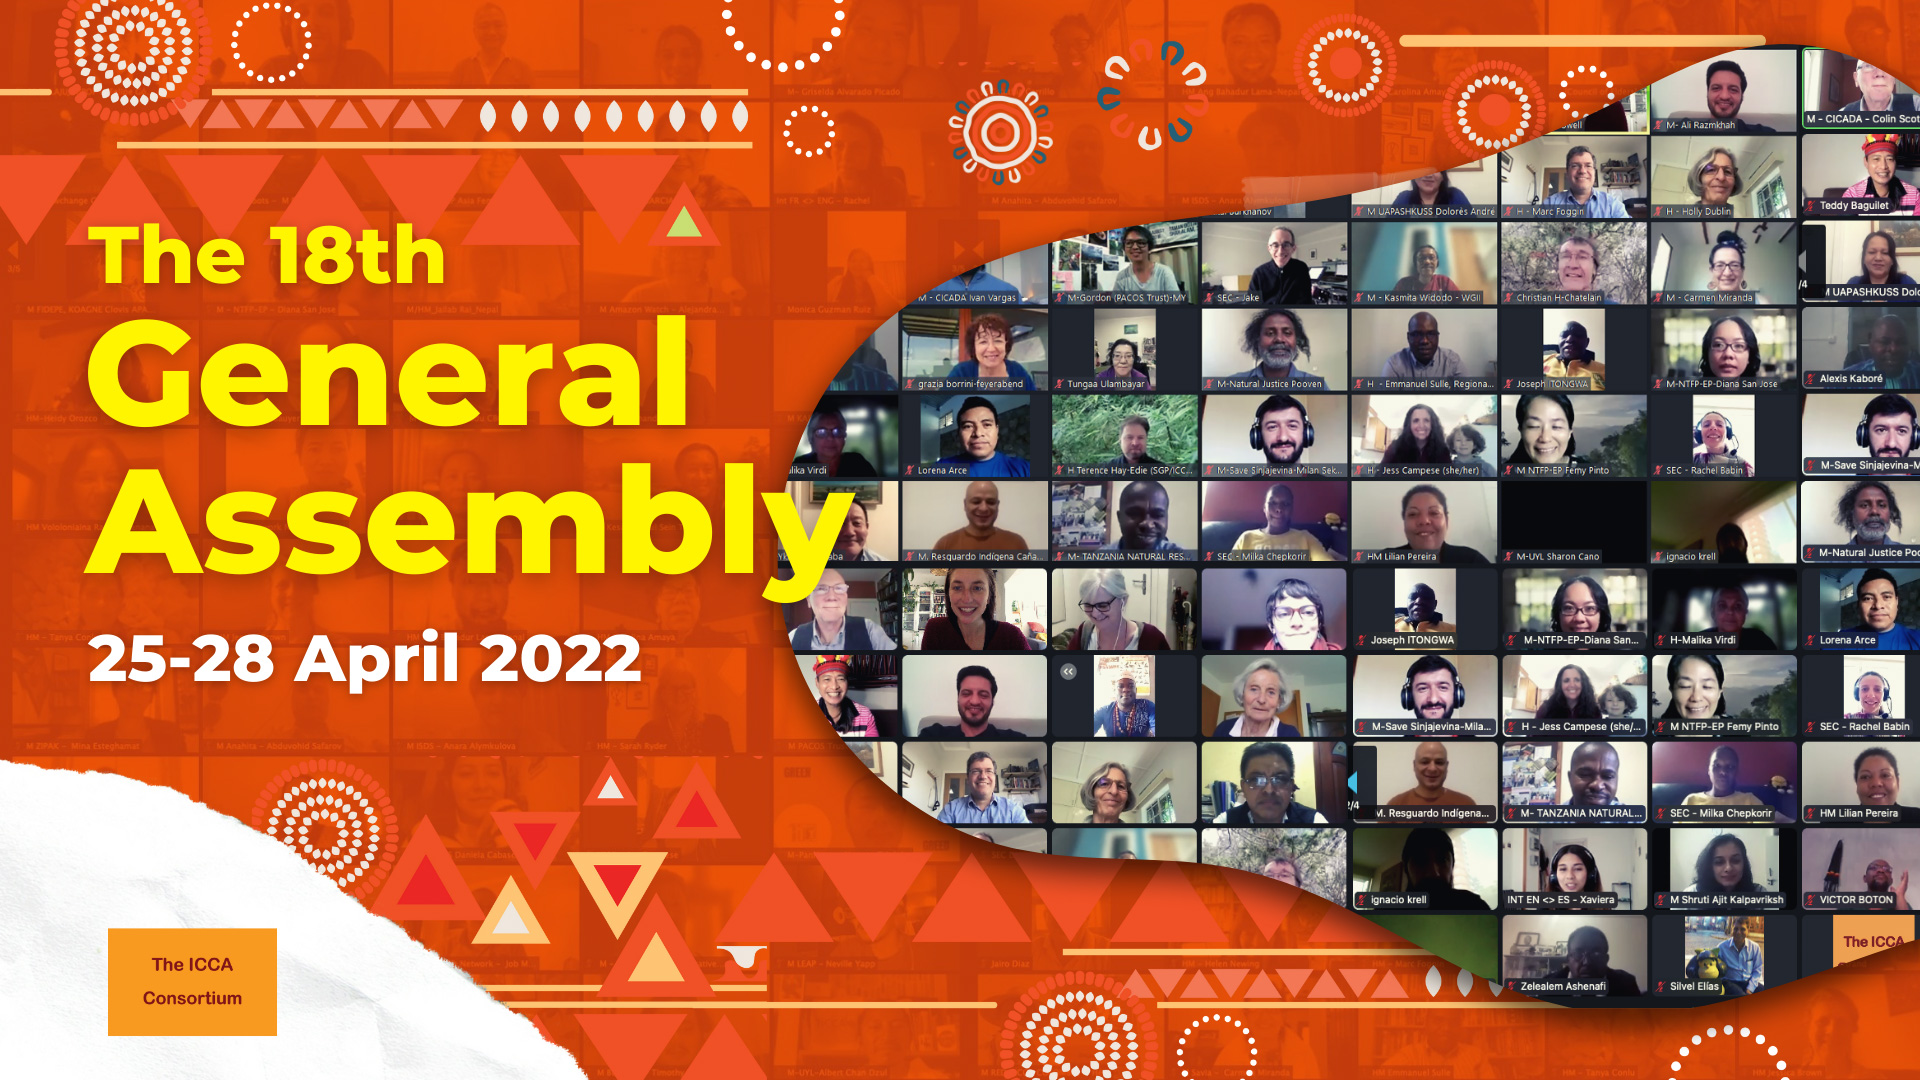 ICCA Consortium successfully holds 18th General Assembly online